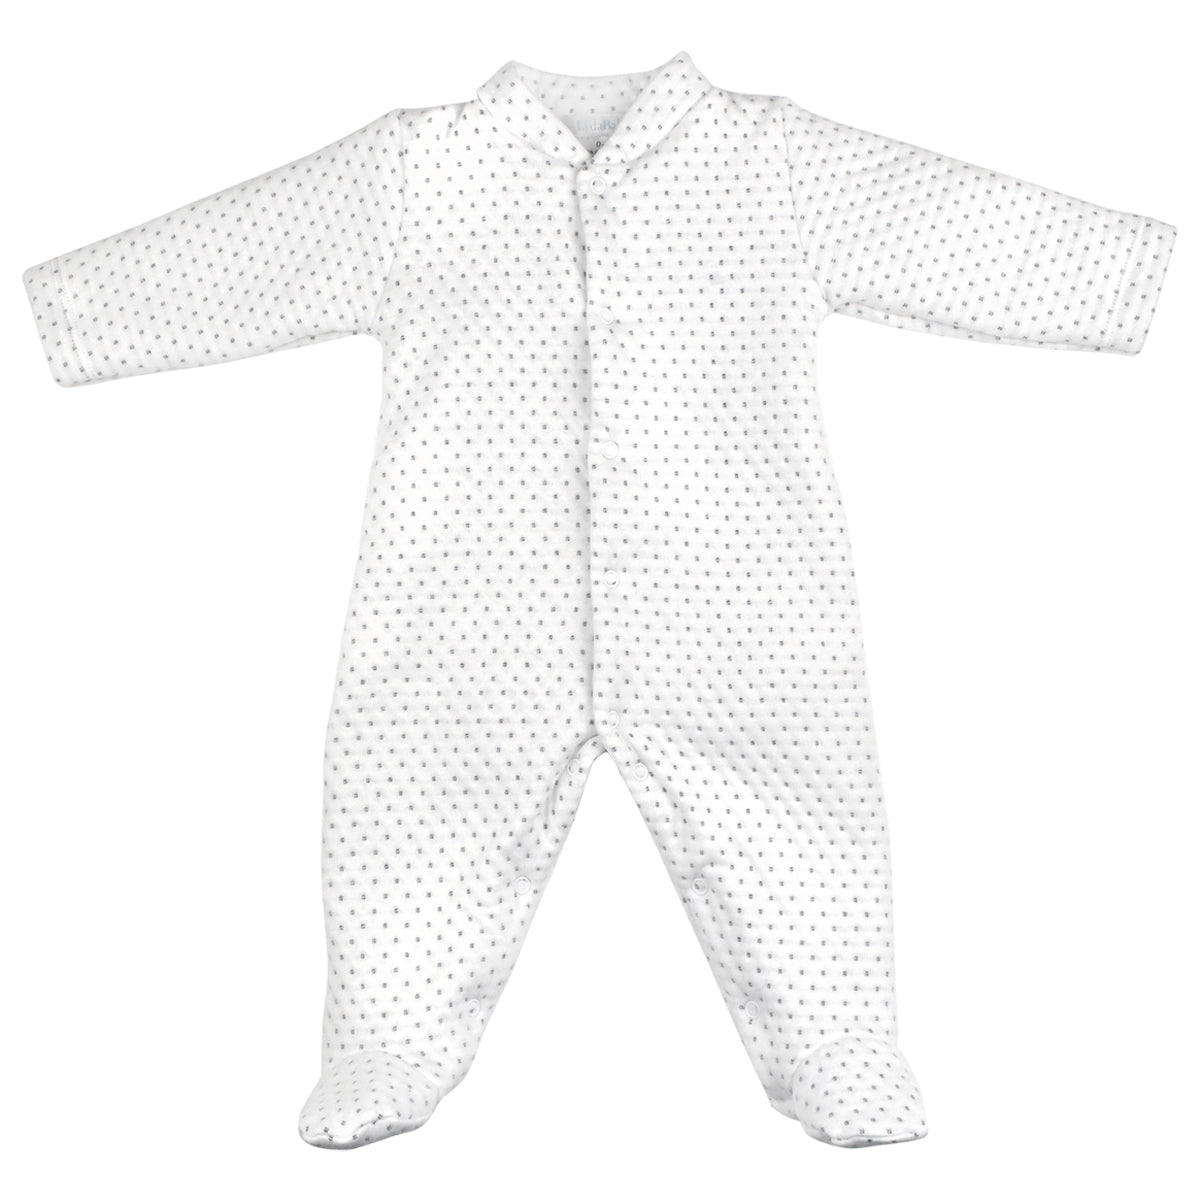 New Comfy Collection Footie | Baby Boy